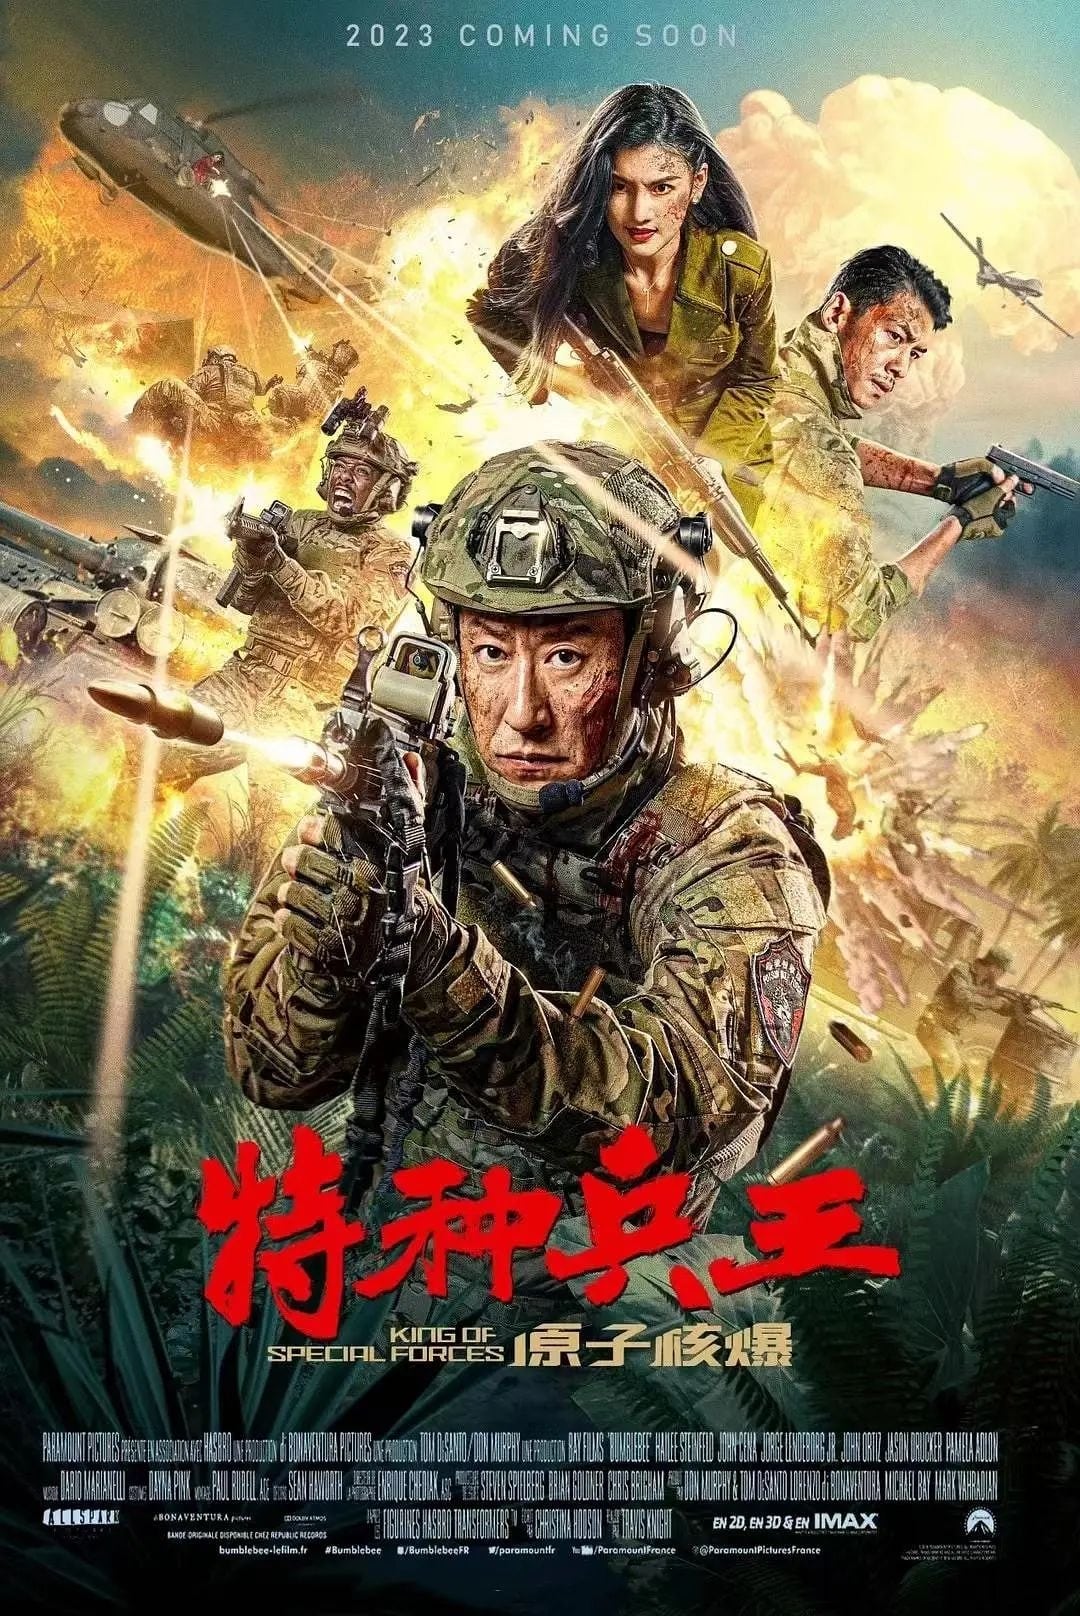 Special Forces King: Nuclear Explosion